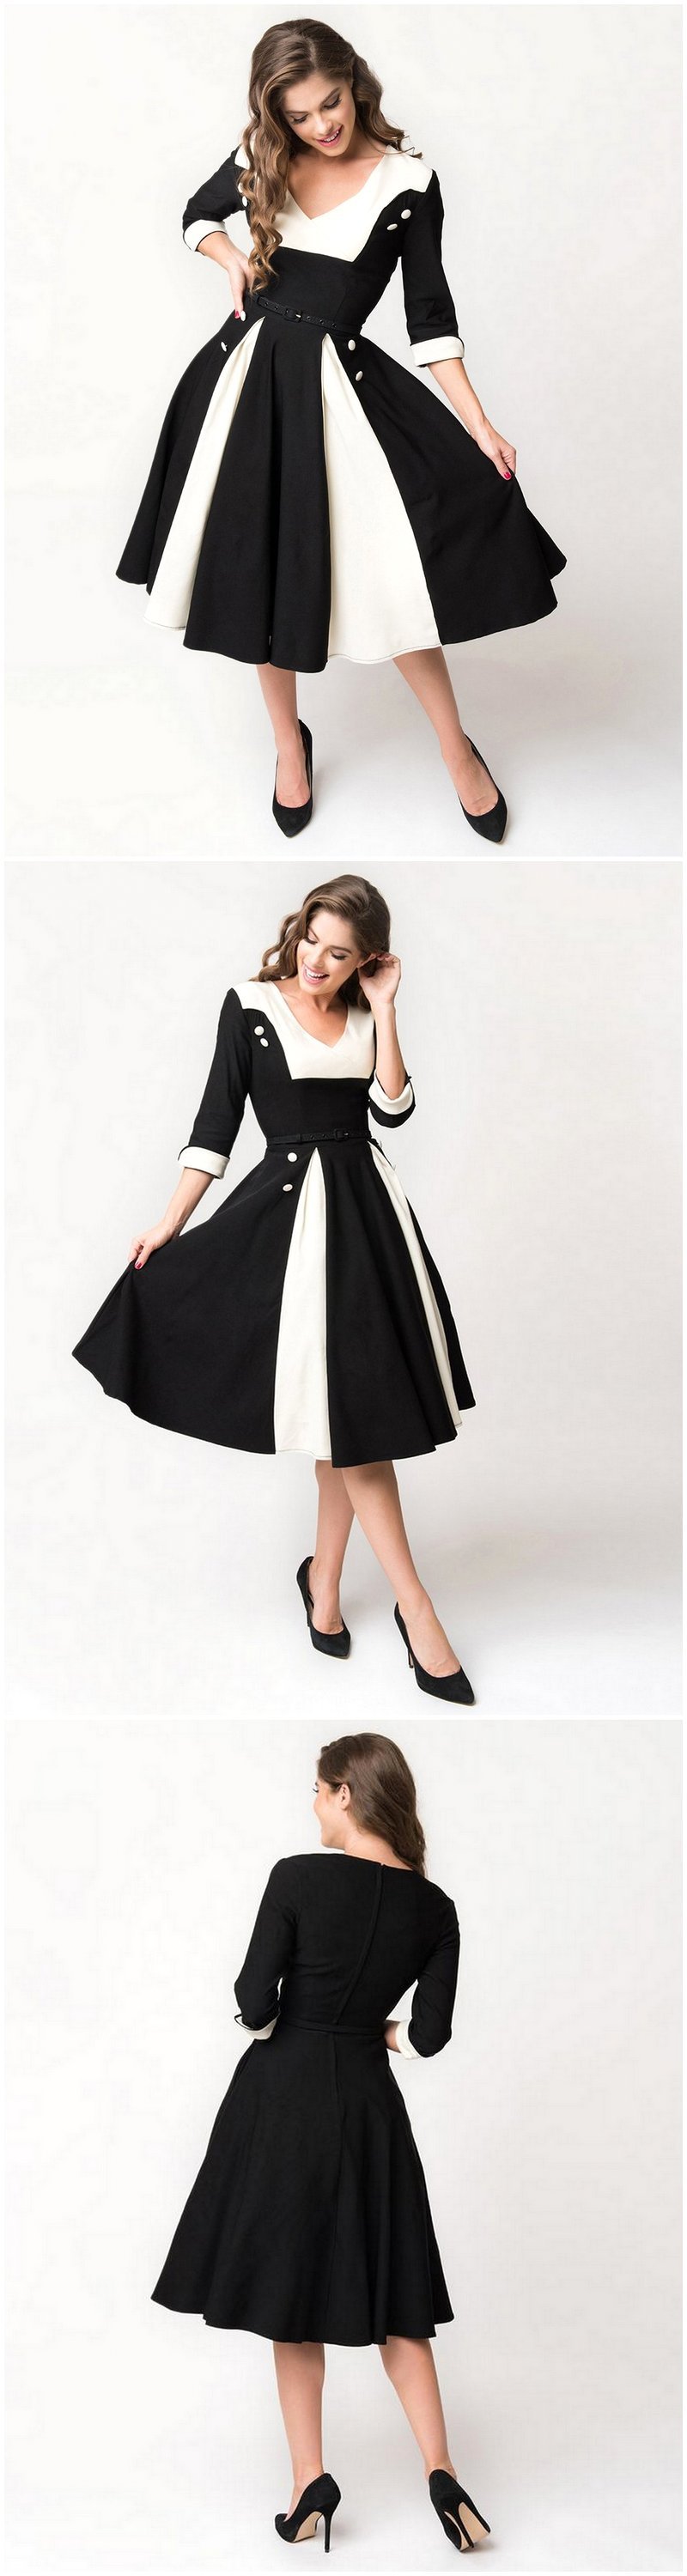 retro vintage outfit for women